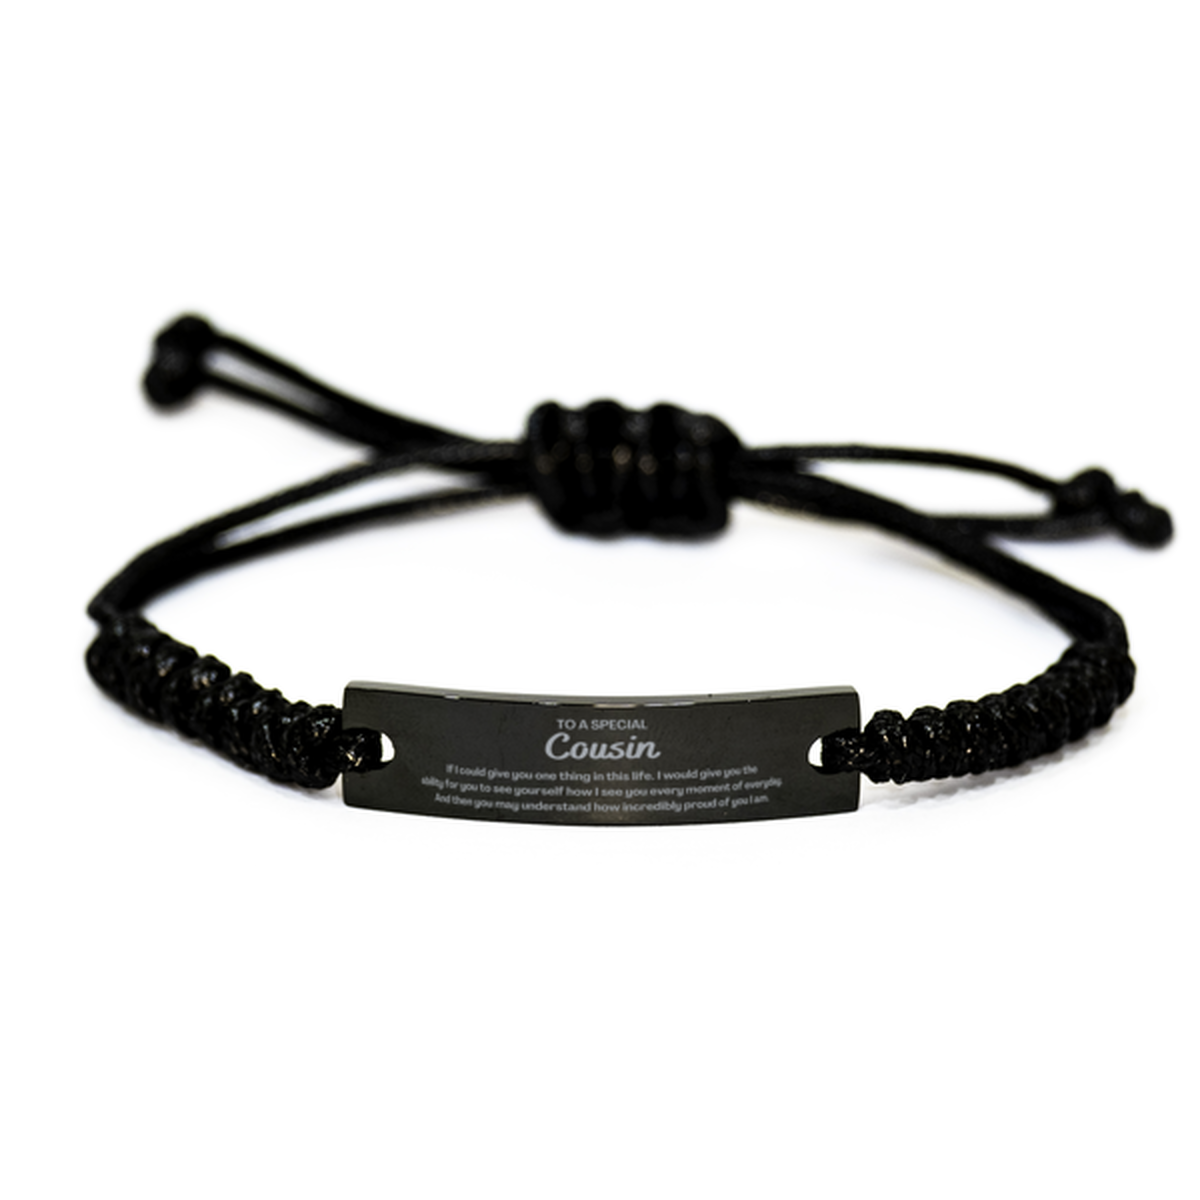 To My Cousin Black Rope Bracelet, Gifts For Cousin Engraved, Inspirational Gifts for Christmas Birthday, Epic Gifts for Cousin To A Special Cousin how incredibly proud of you I am